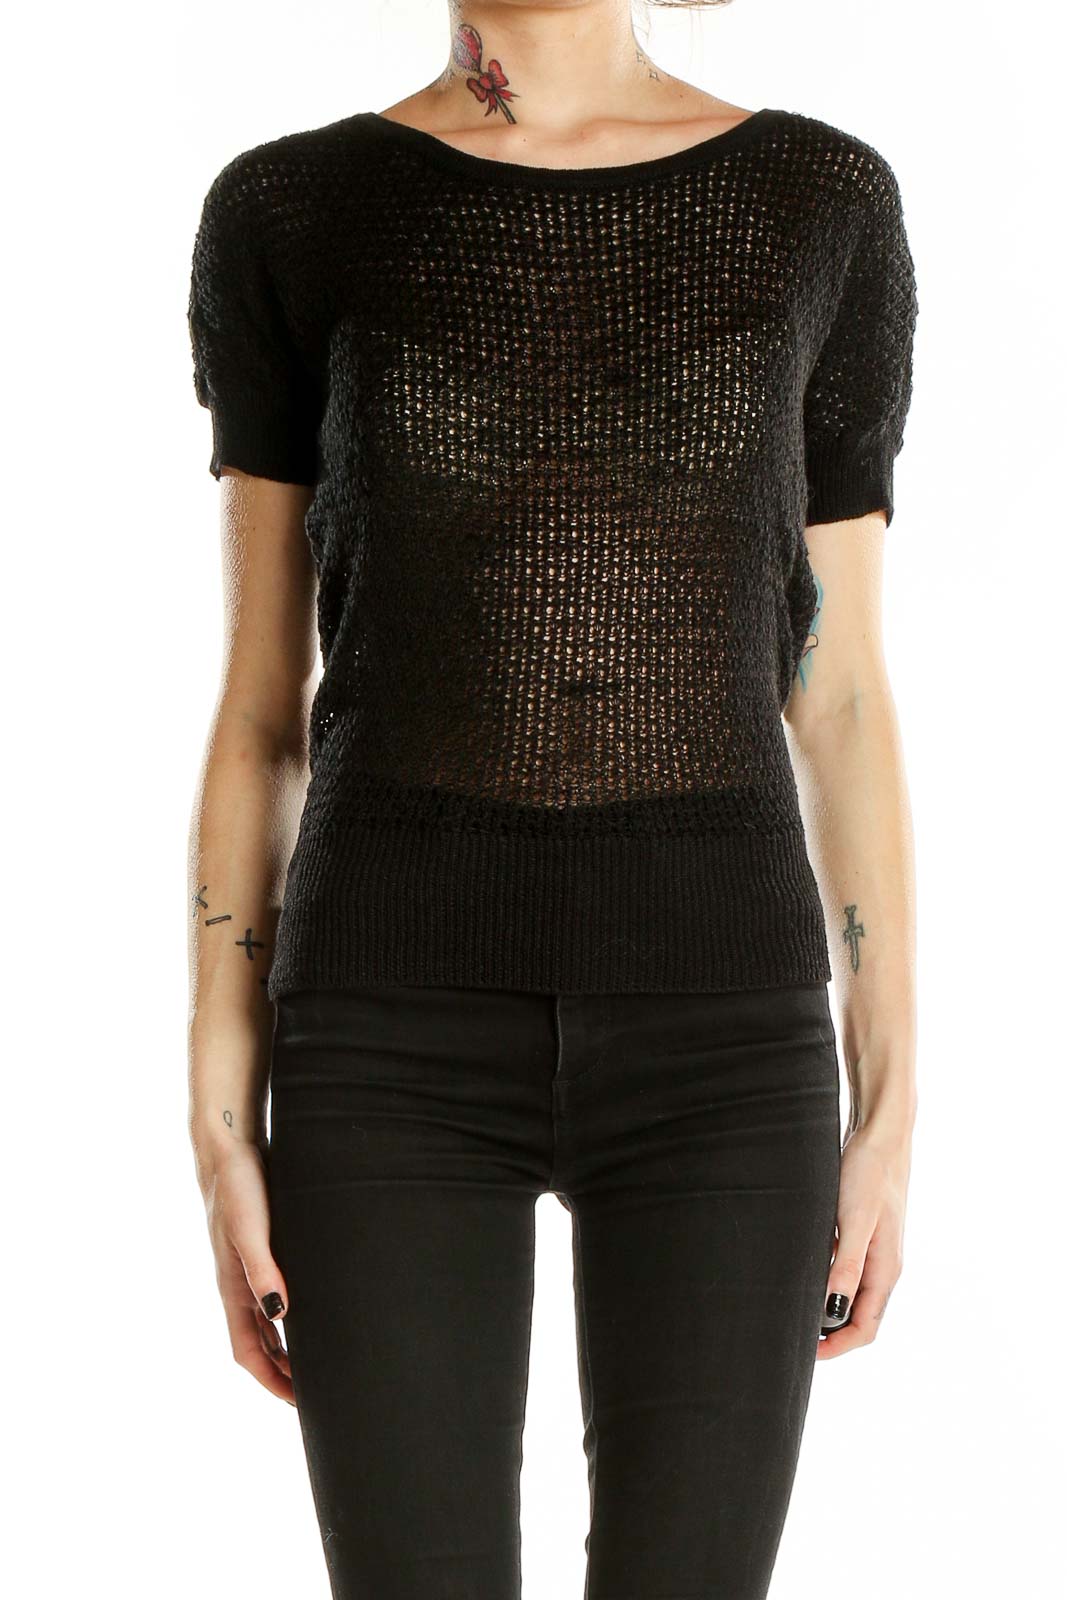 Black Short Sleeve Knit Sweater Front